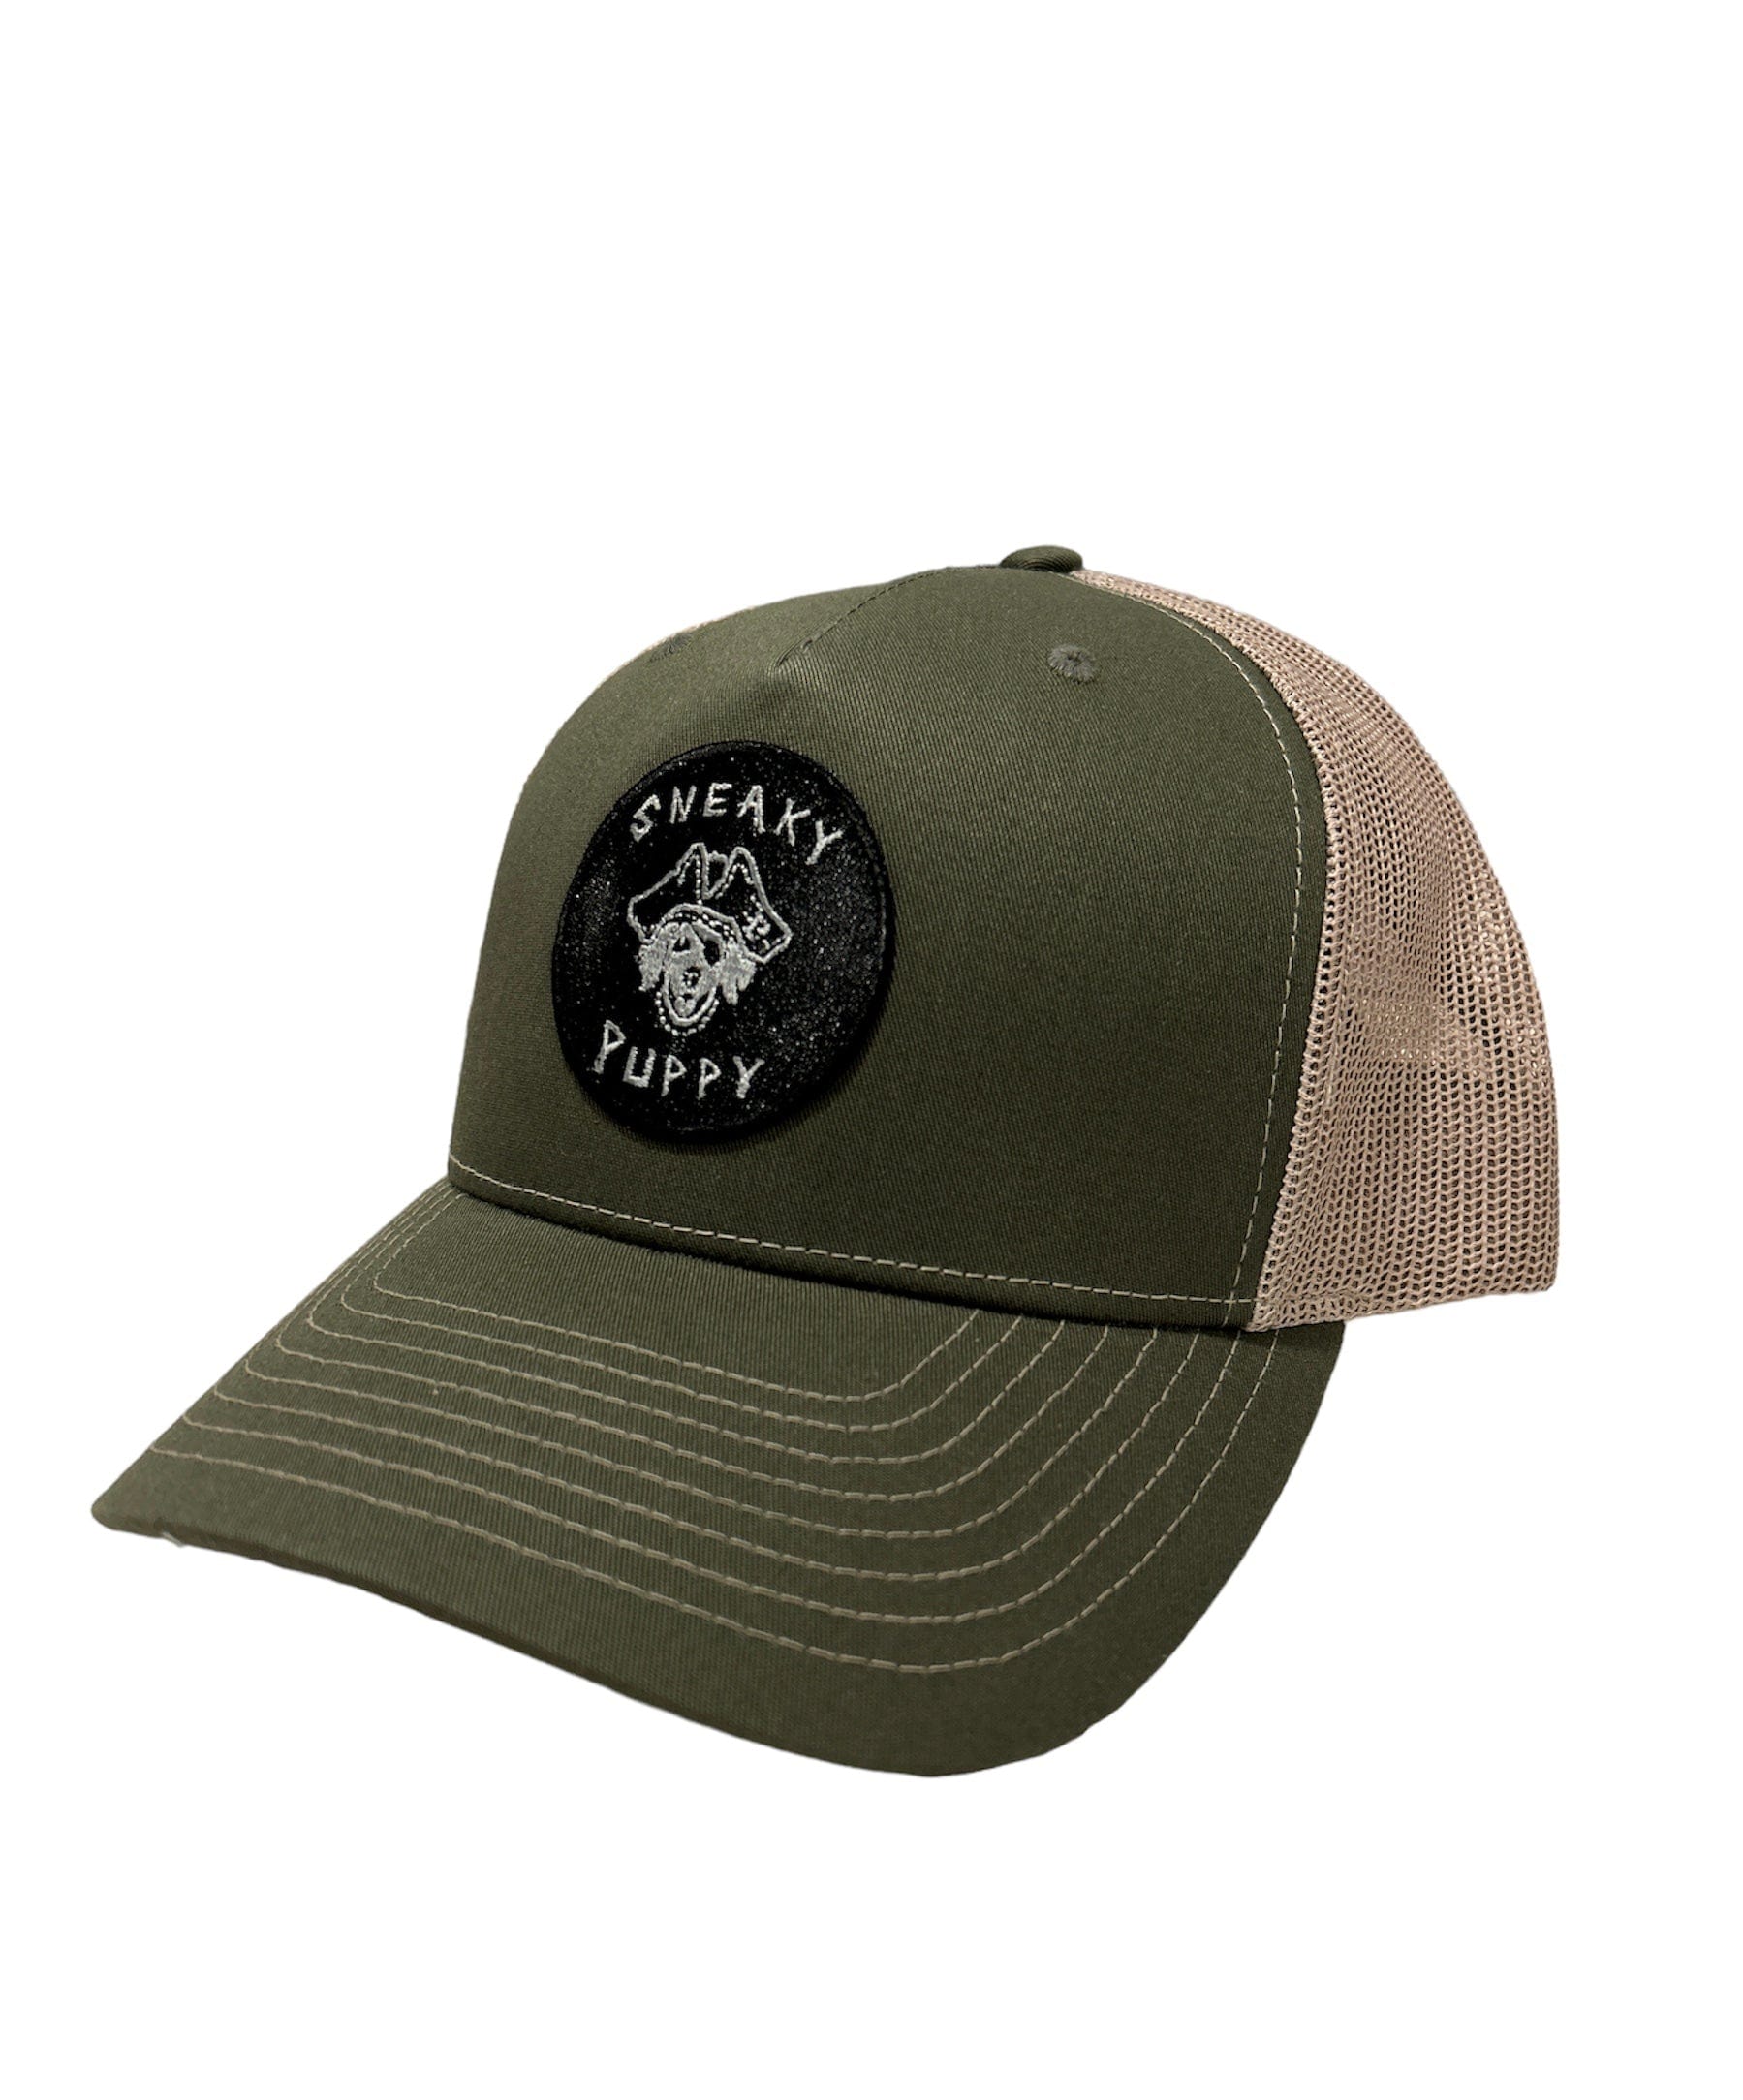 Land Pirate Headwear Army Olive Green Tan / MD-LG (6 7/8 - 7 5/8) the 'Haven'